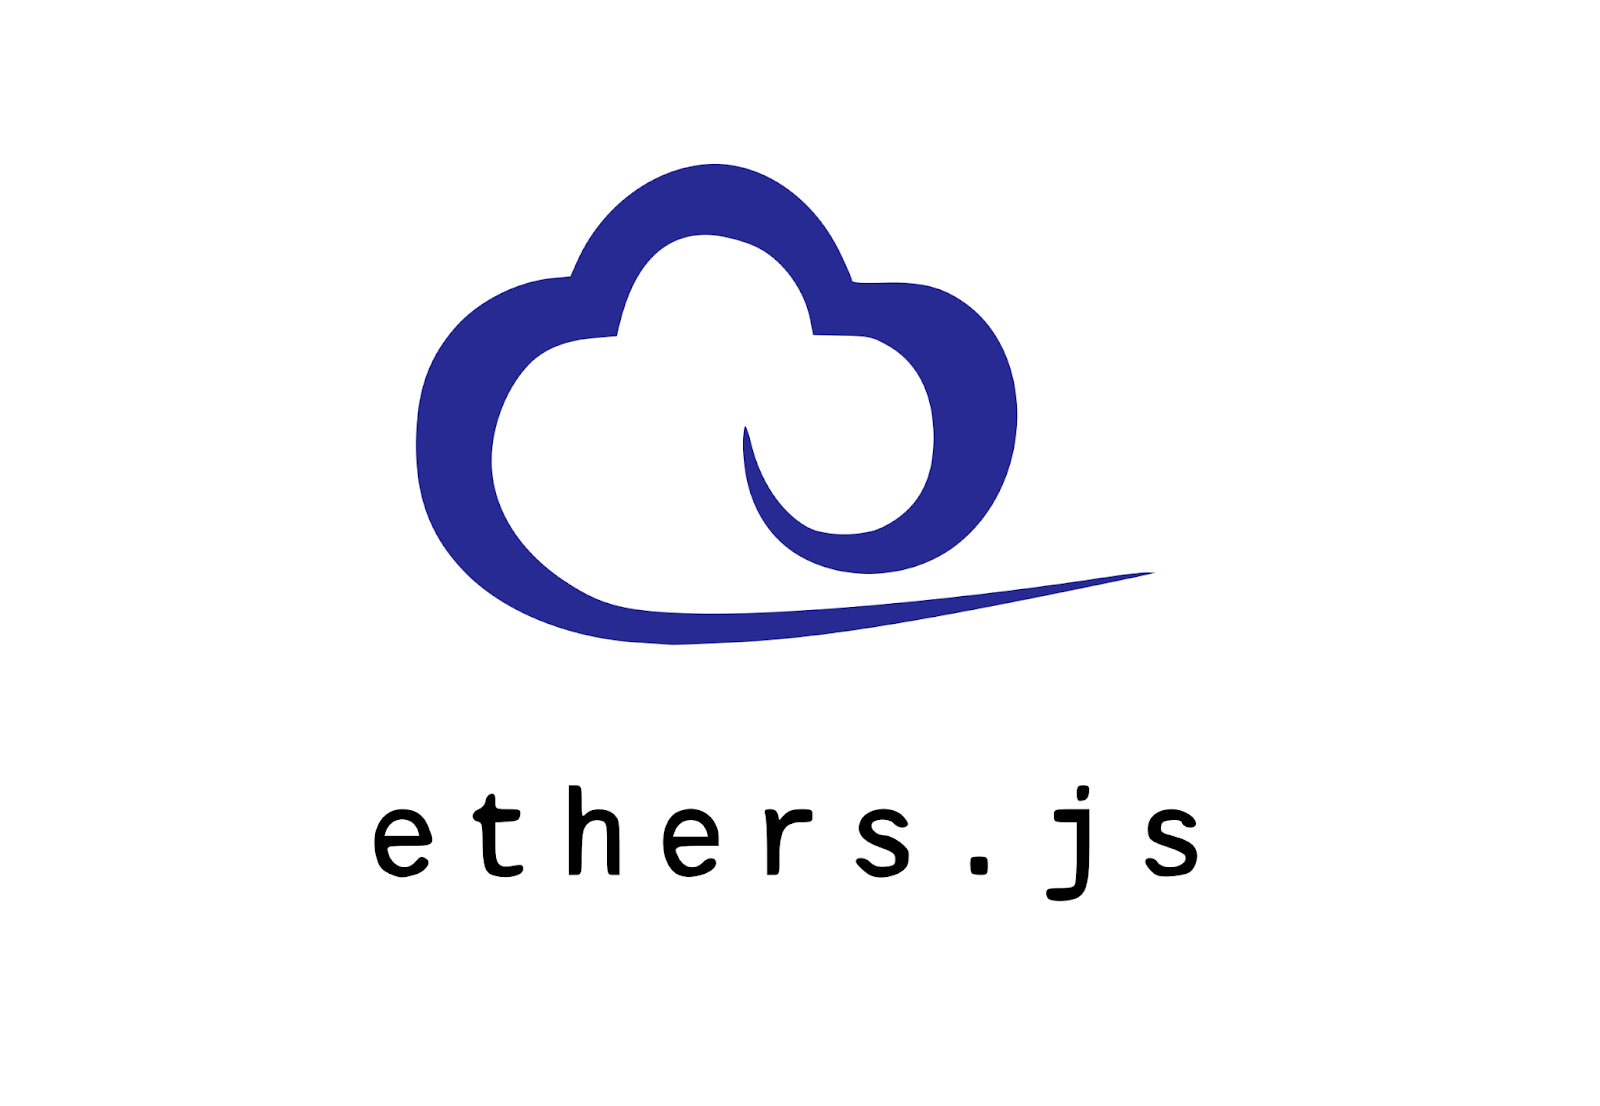 a cloud on top of the ethers.js title